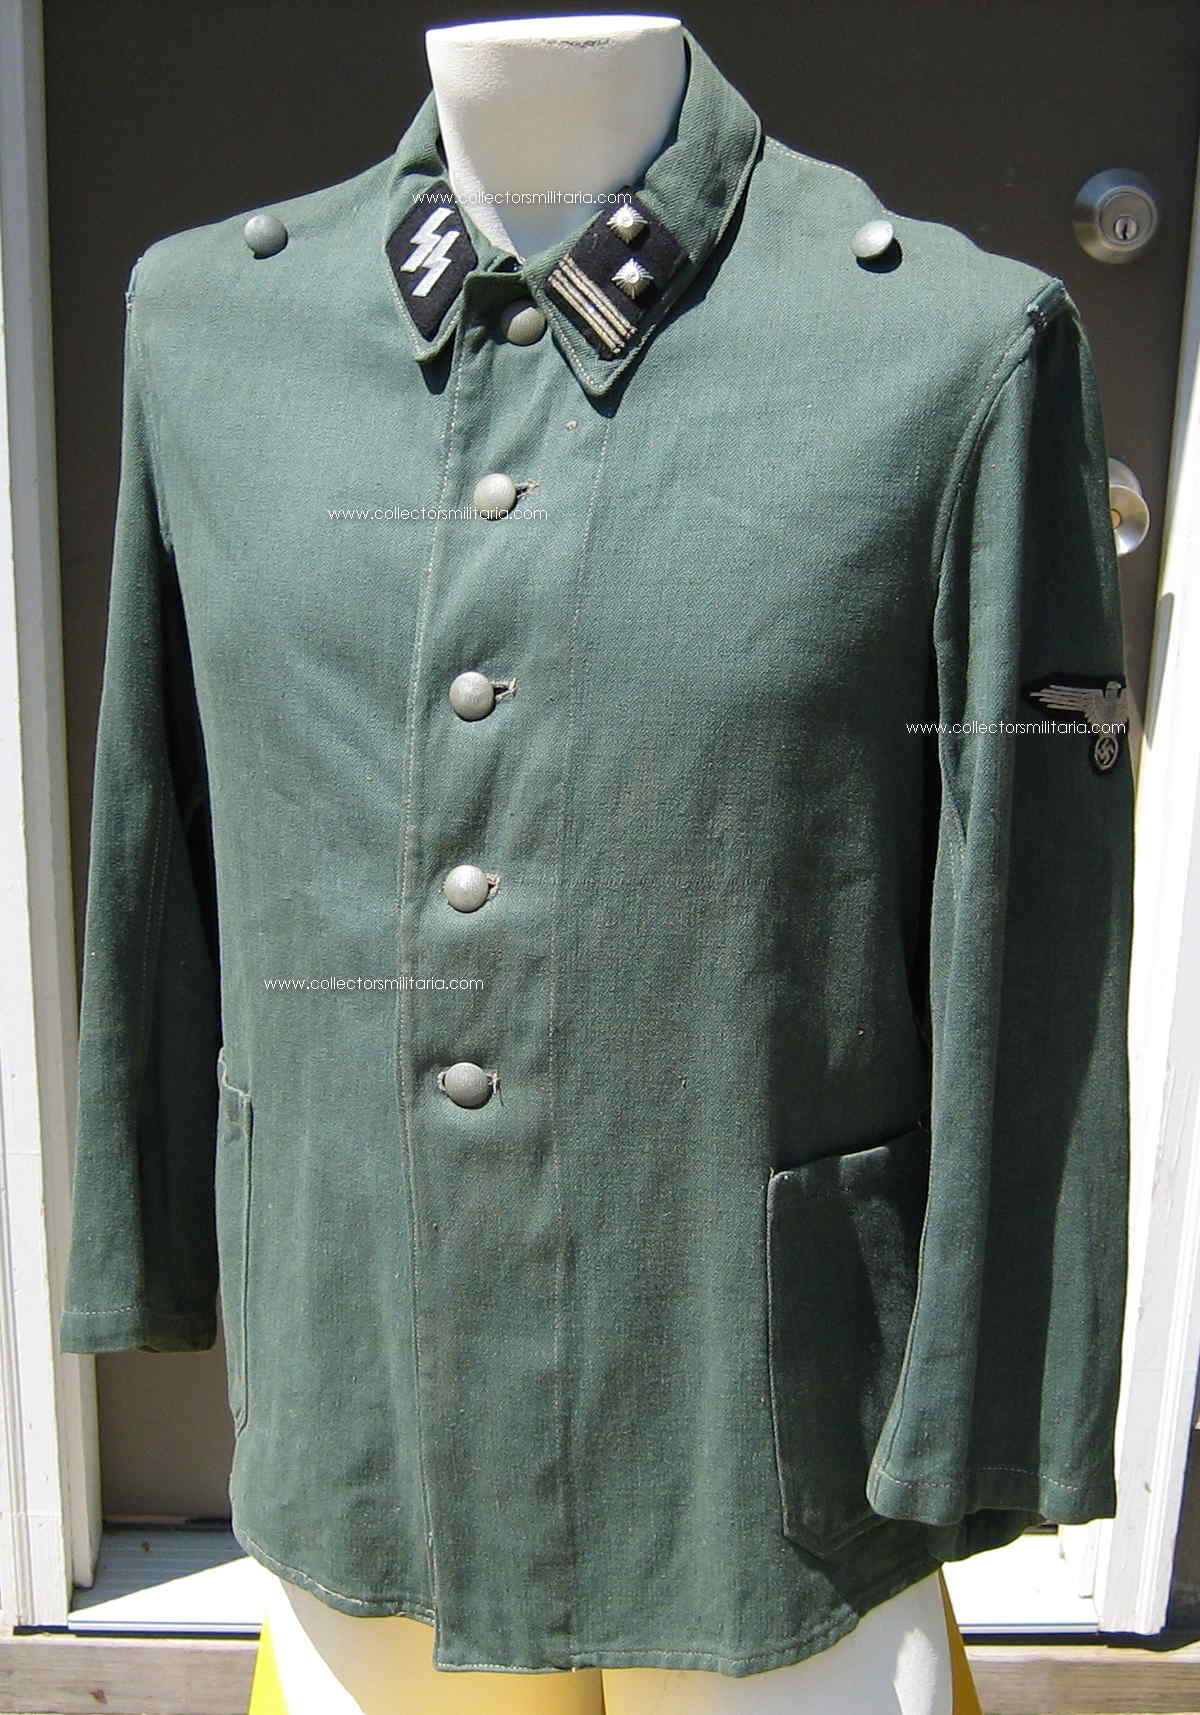 SS Officers HBT Drillich Tunic